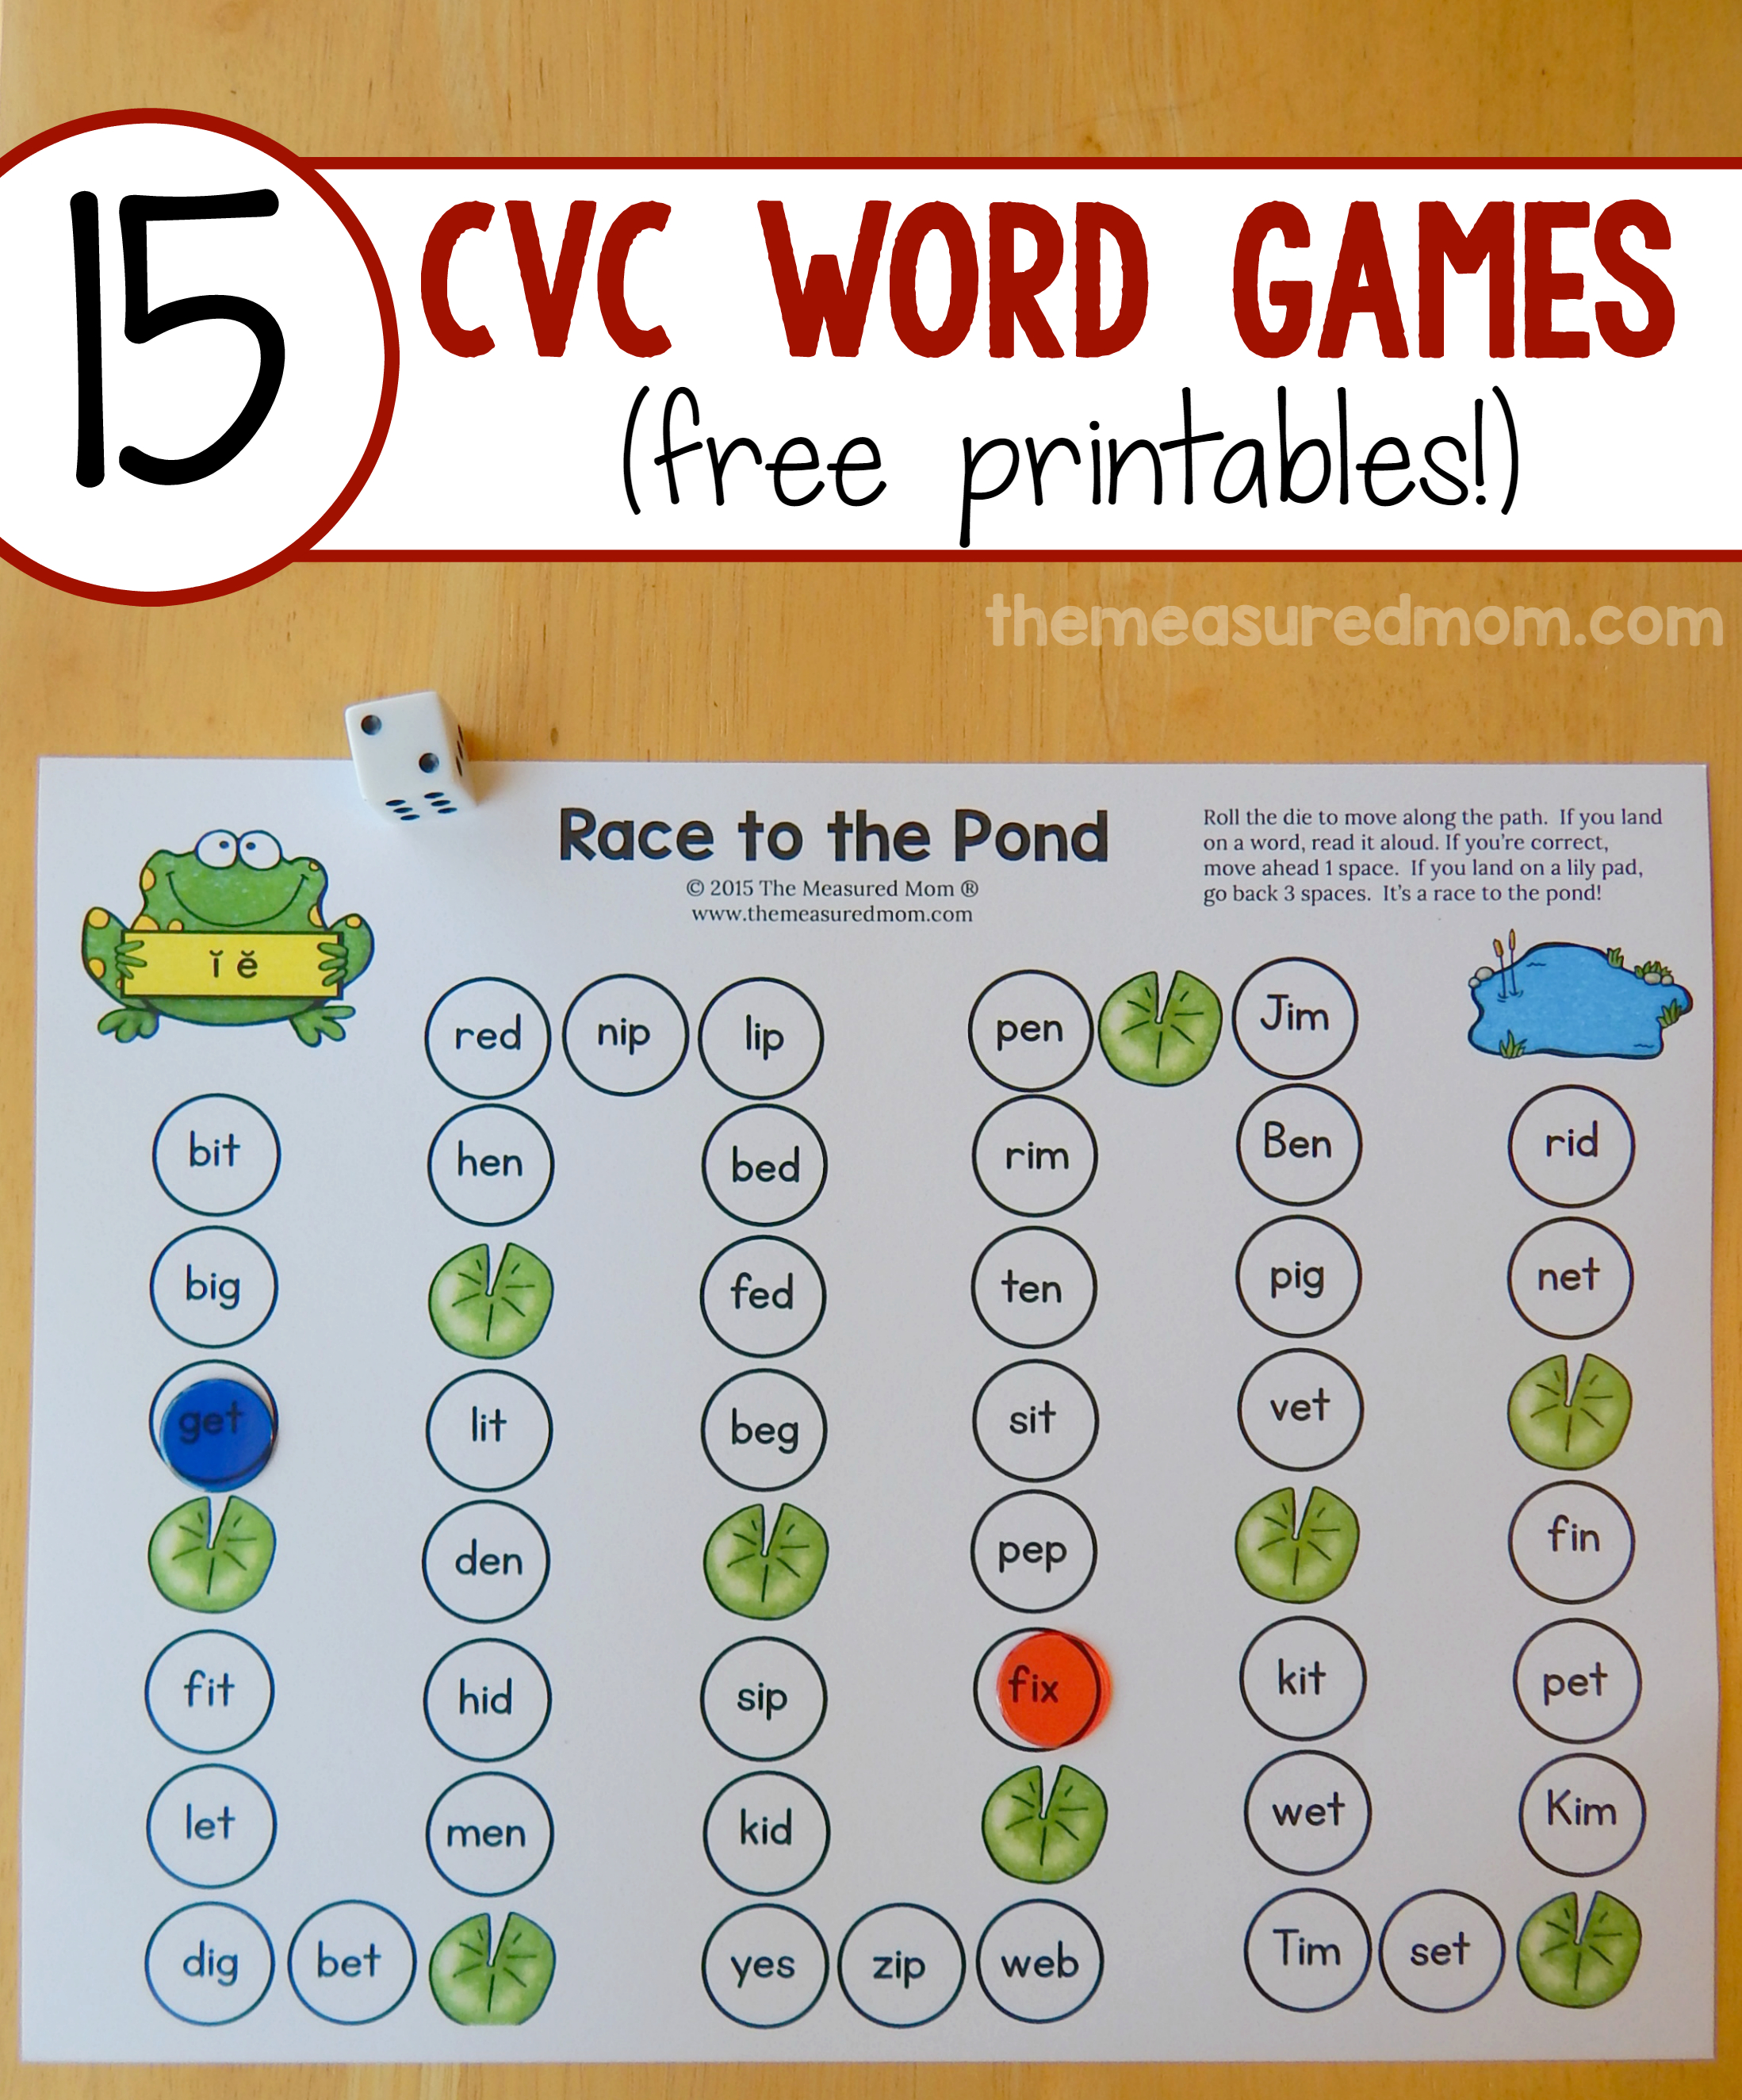 Teach Cvc Words With 15 Free Games! - The Measured Mom - Free Printable Cvc Words With Pictures